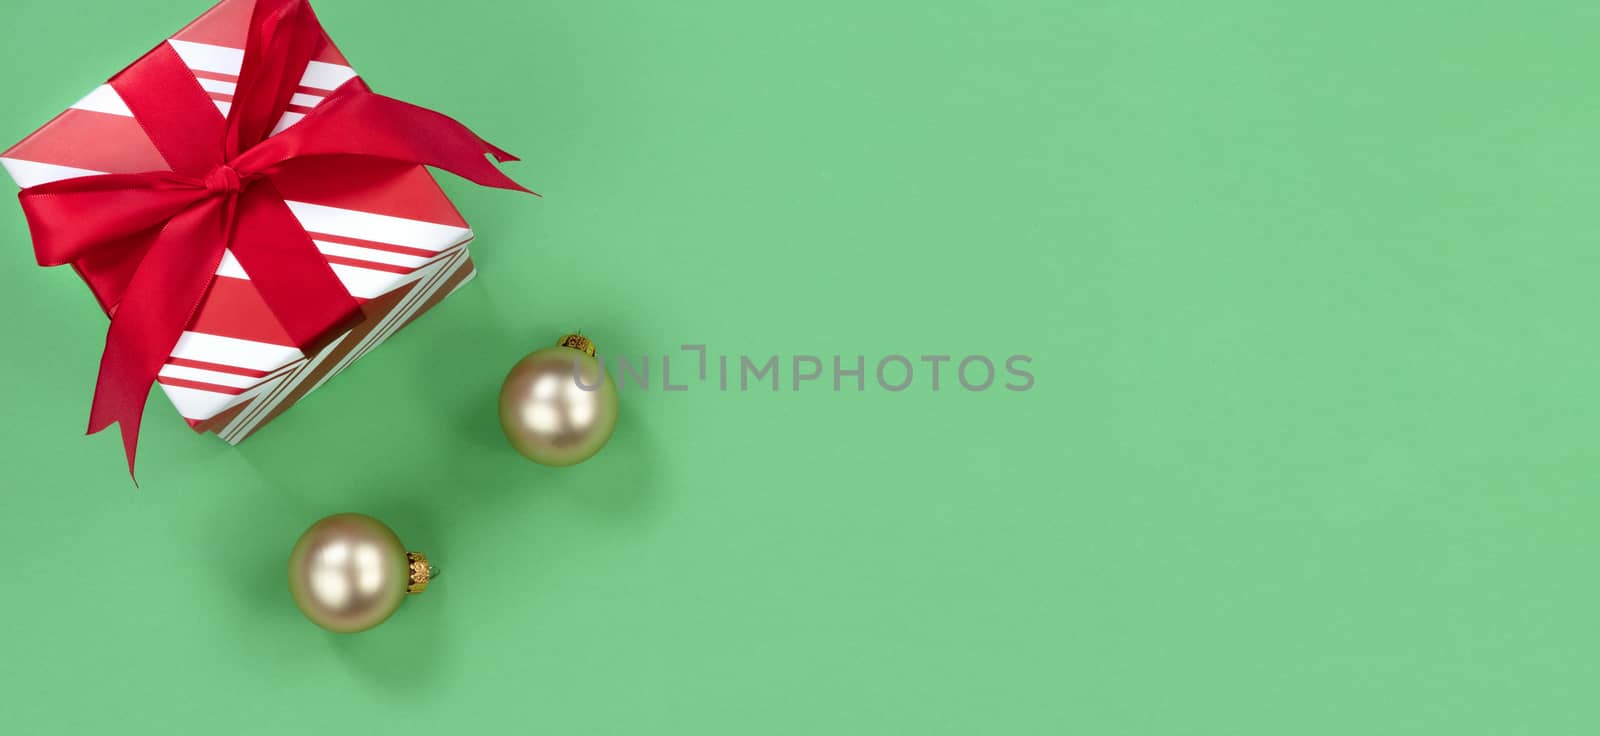 Bright green background with gift box and golden ornaments for t by tab1962